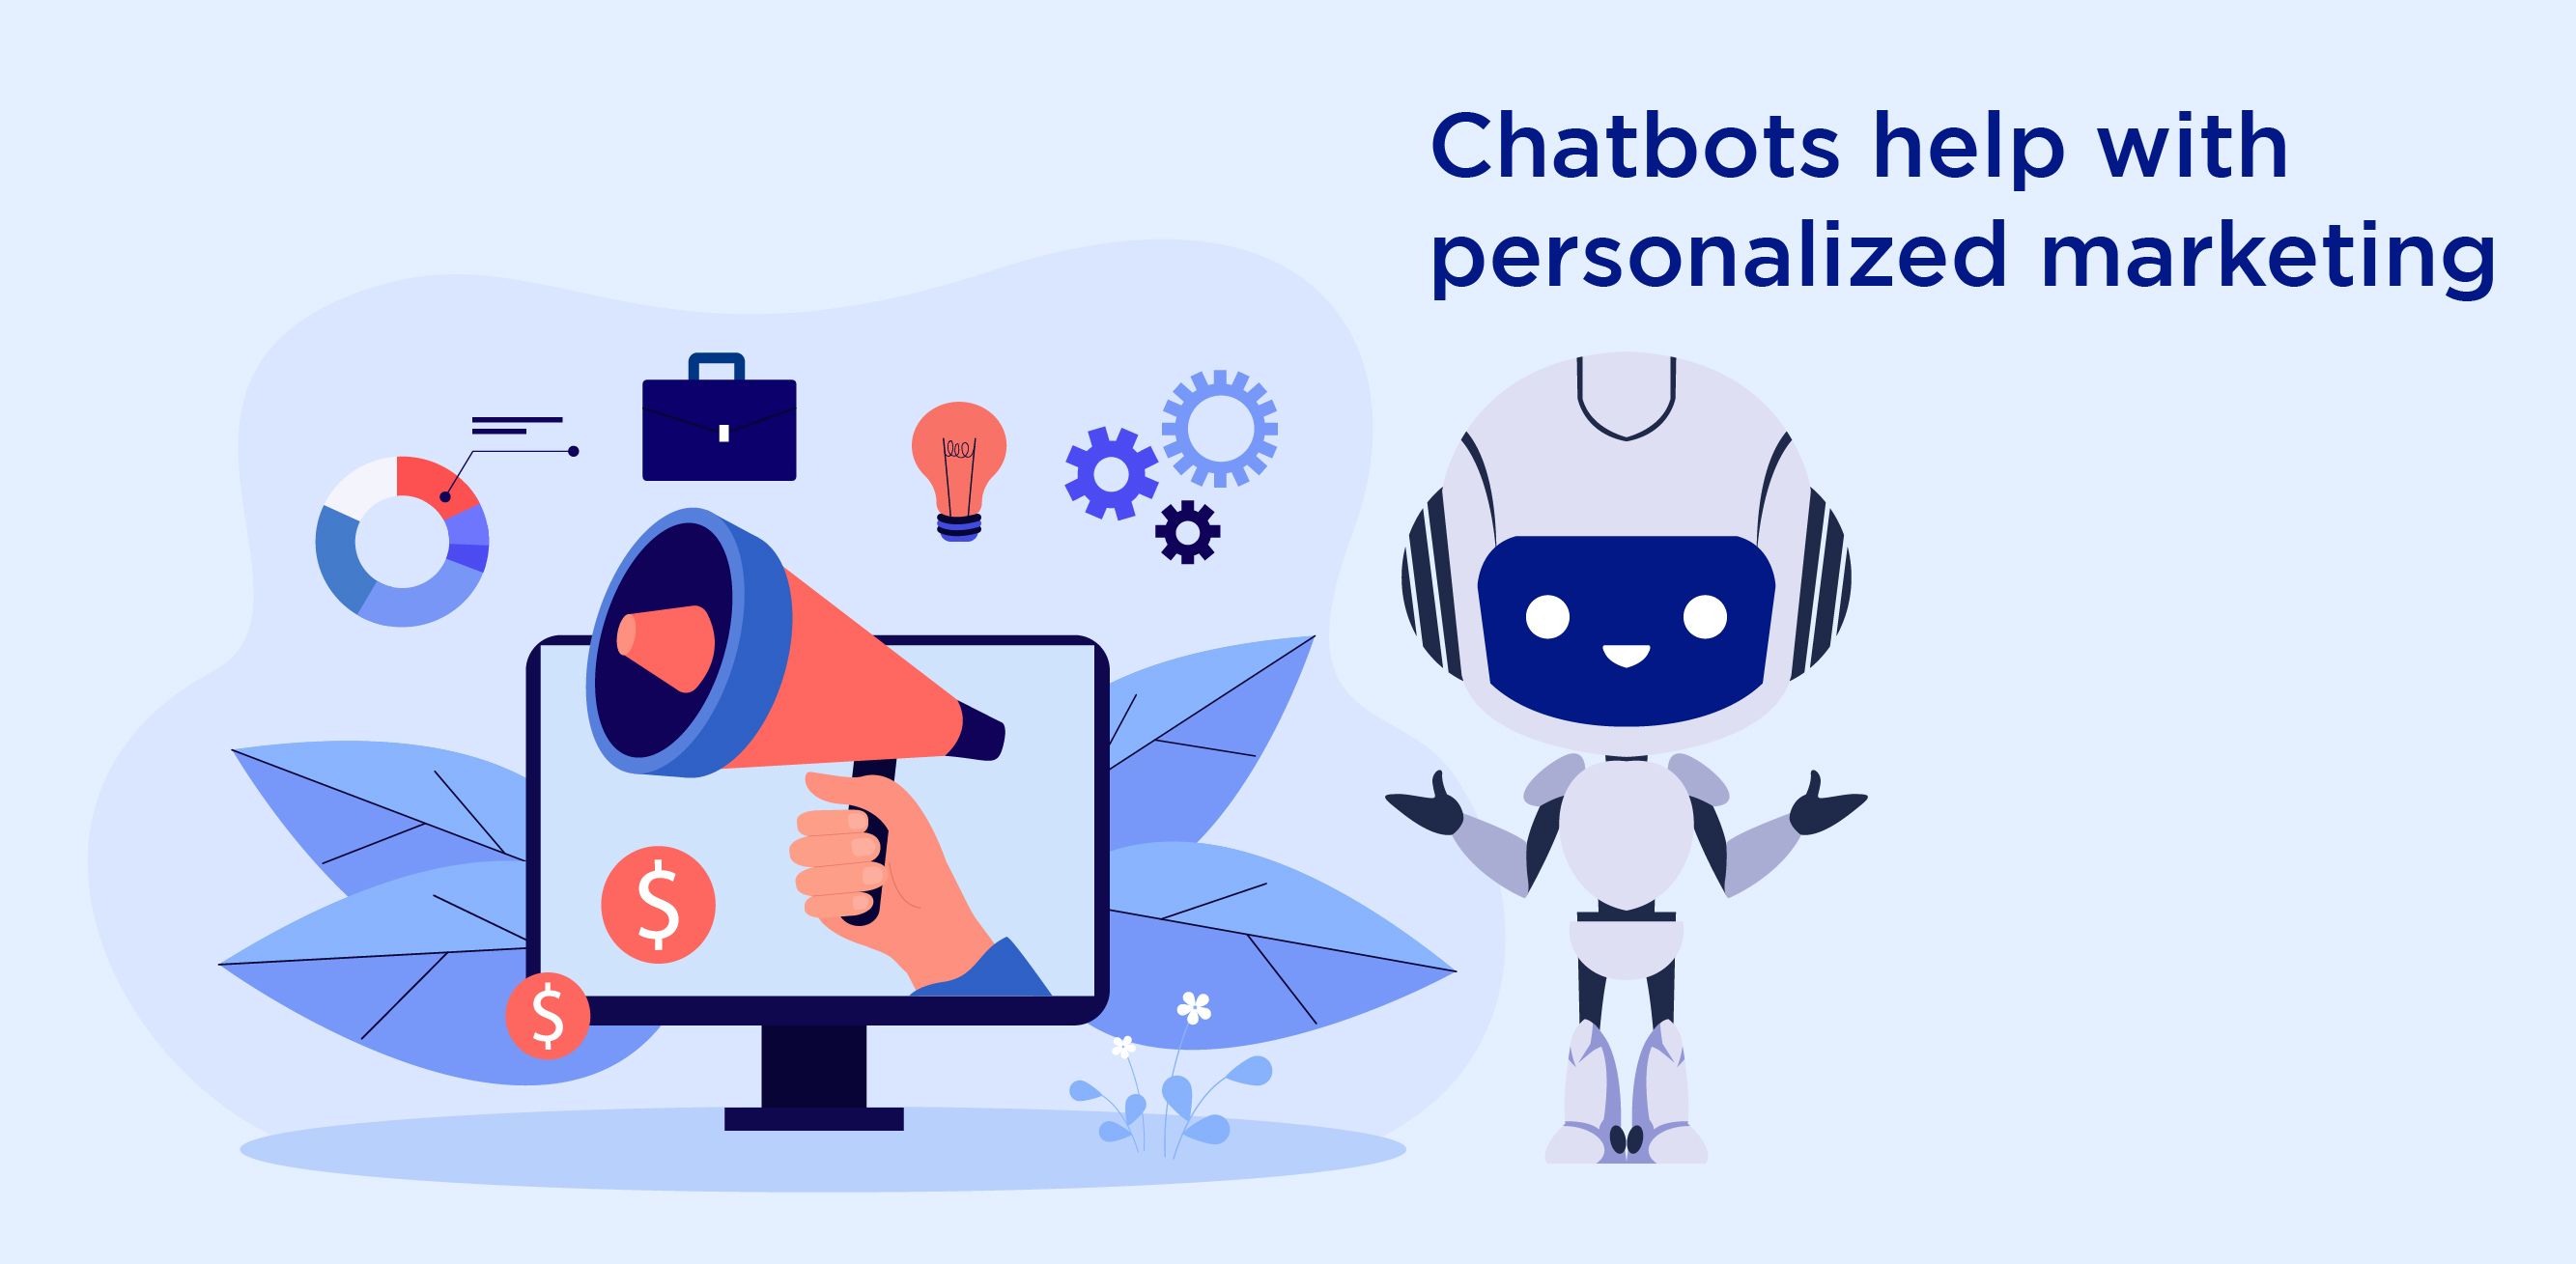 Chatbots help with personalized marketing